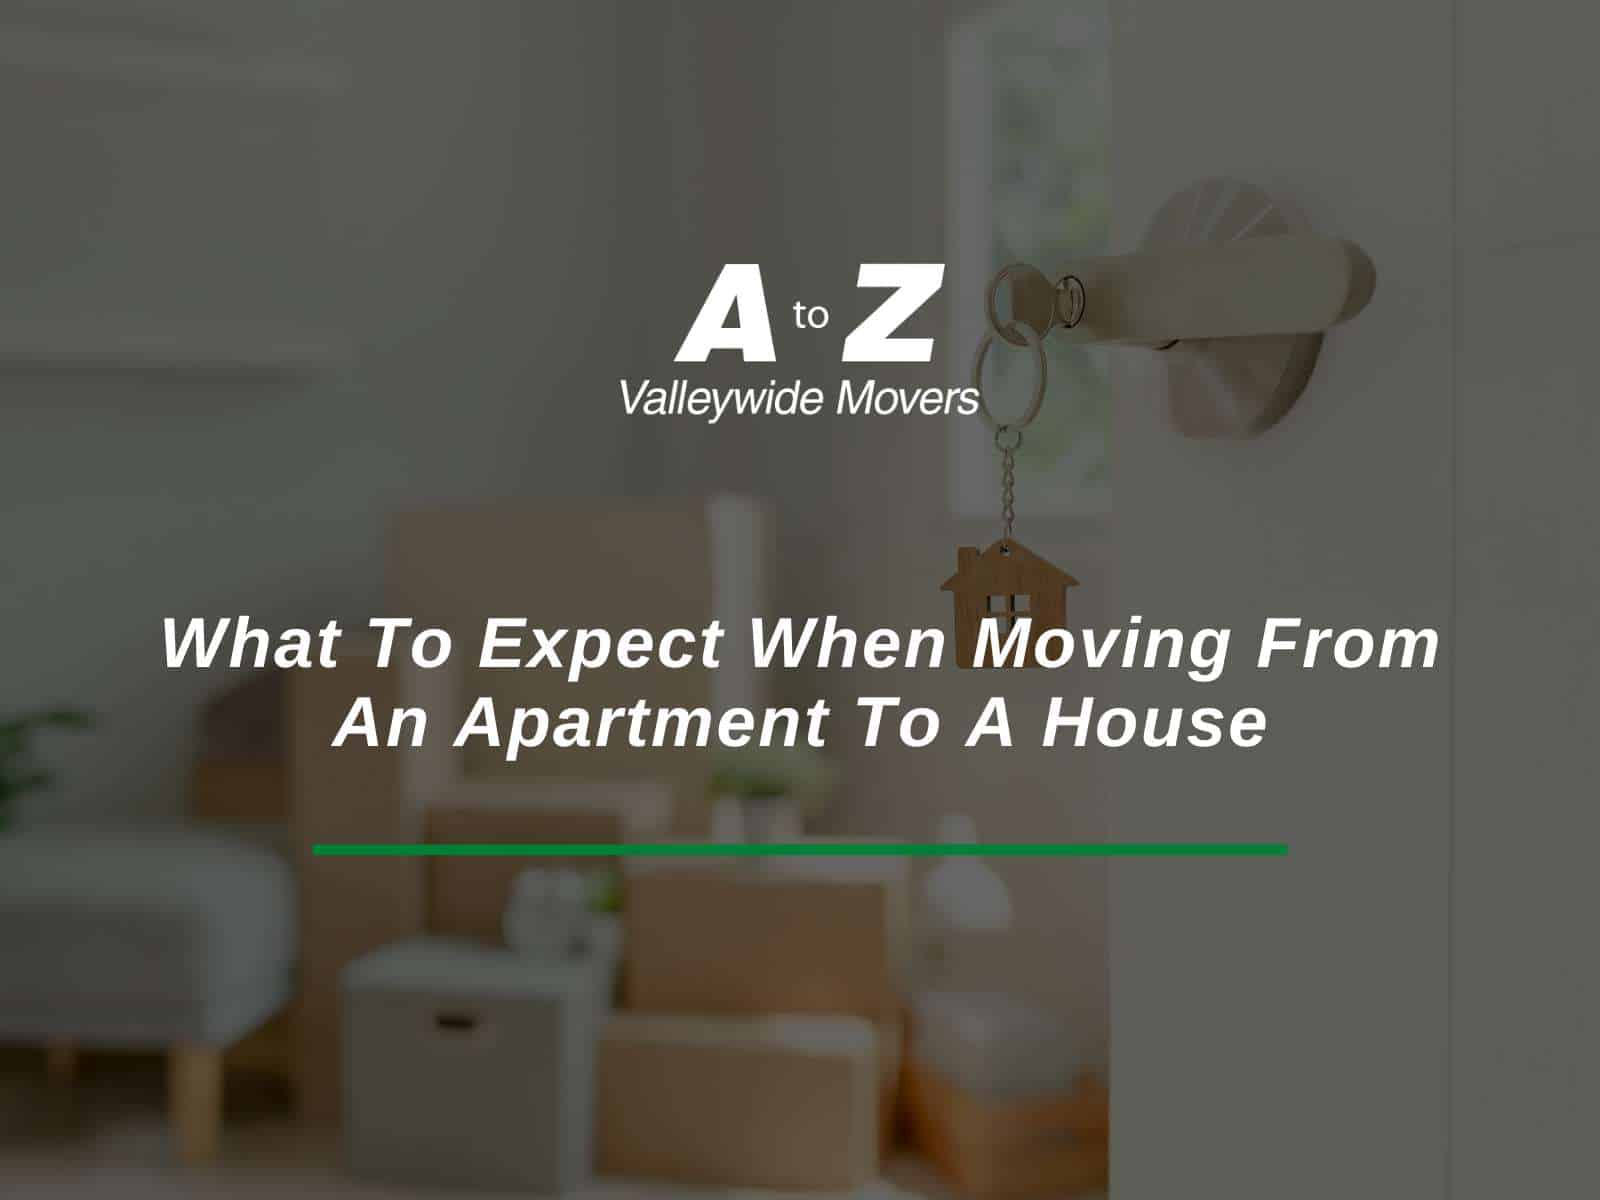 What To Expect When Moving From An Apartment To A House